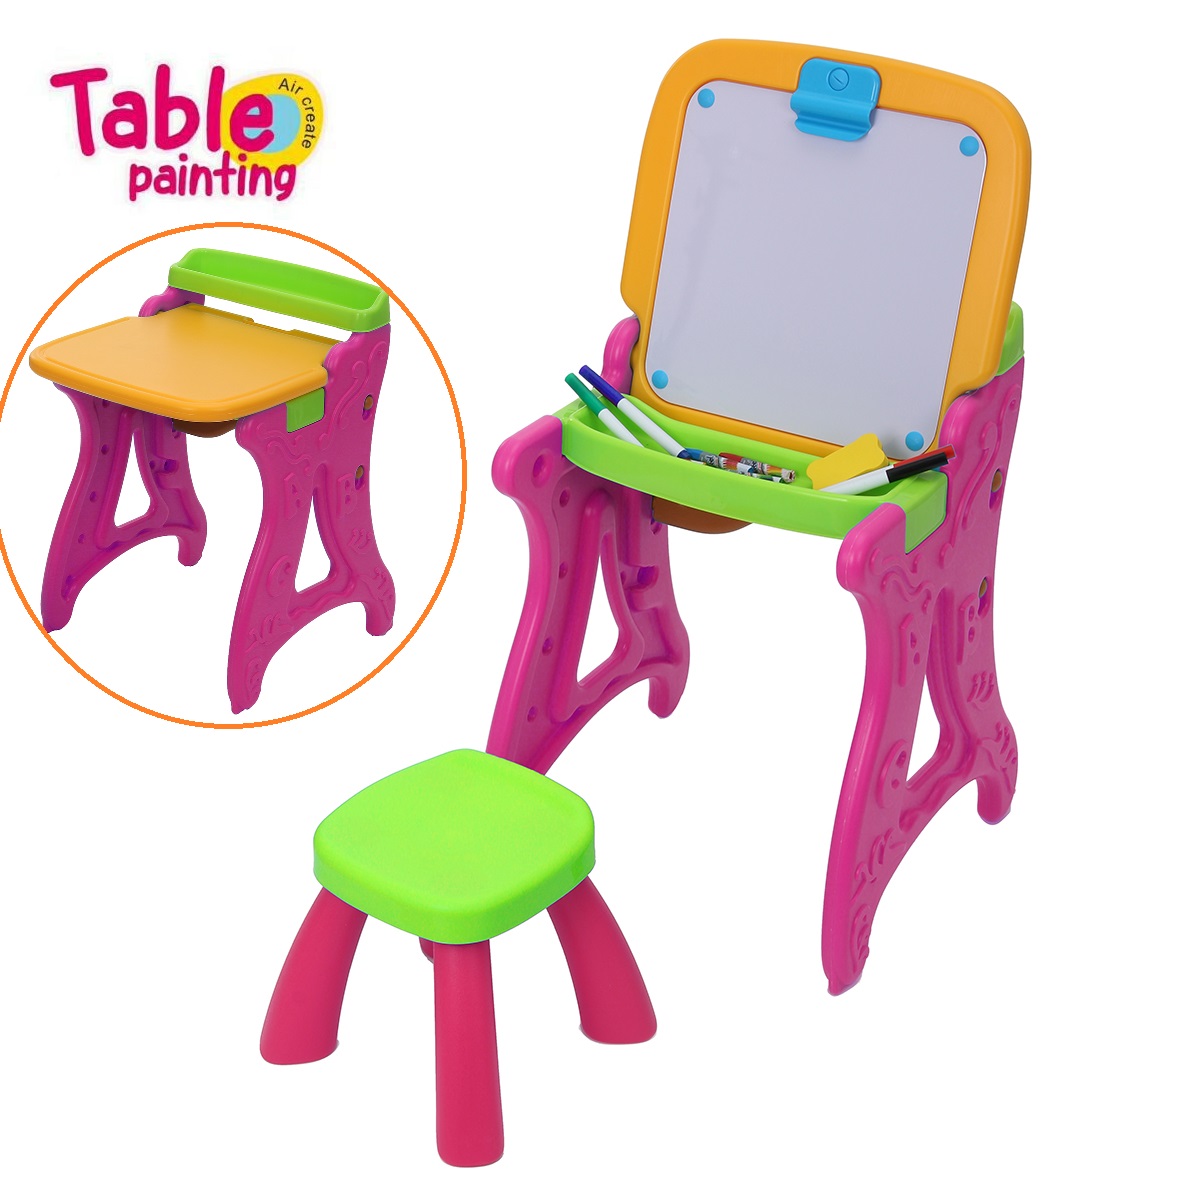 2-in-1-Folding-Drawing-Board-Table-Set-with-a-Kid-Sized-Stool-Plastic-Magnetic-Writing-White-Board-I-1853465-4